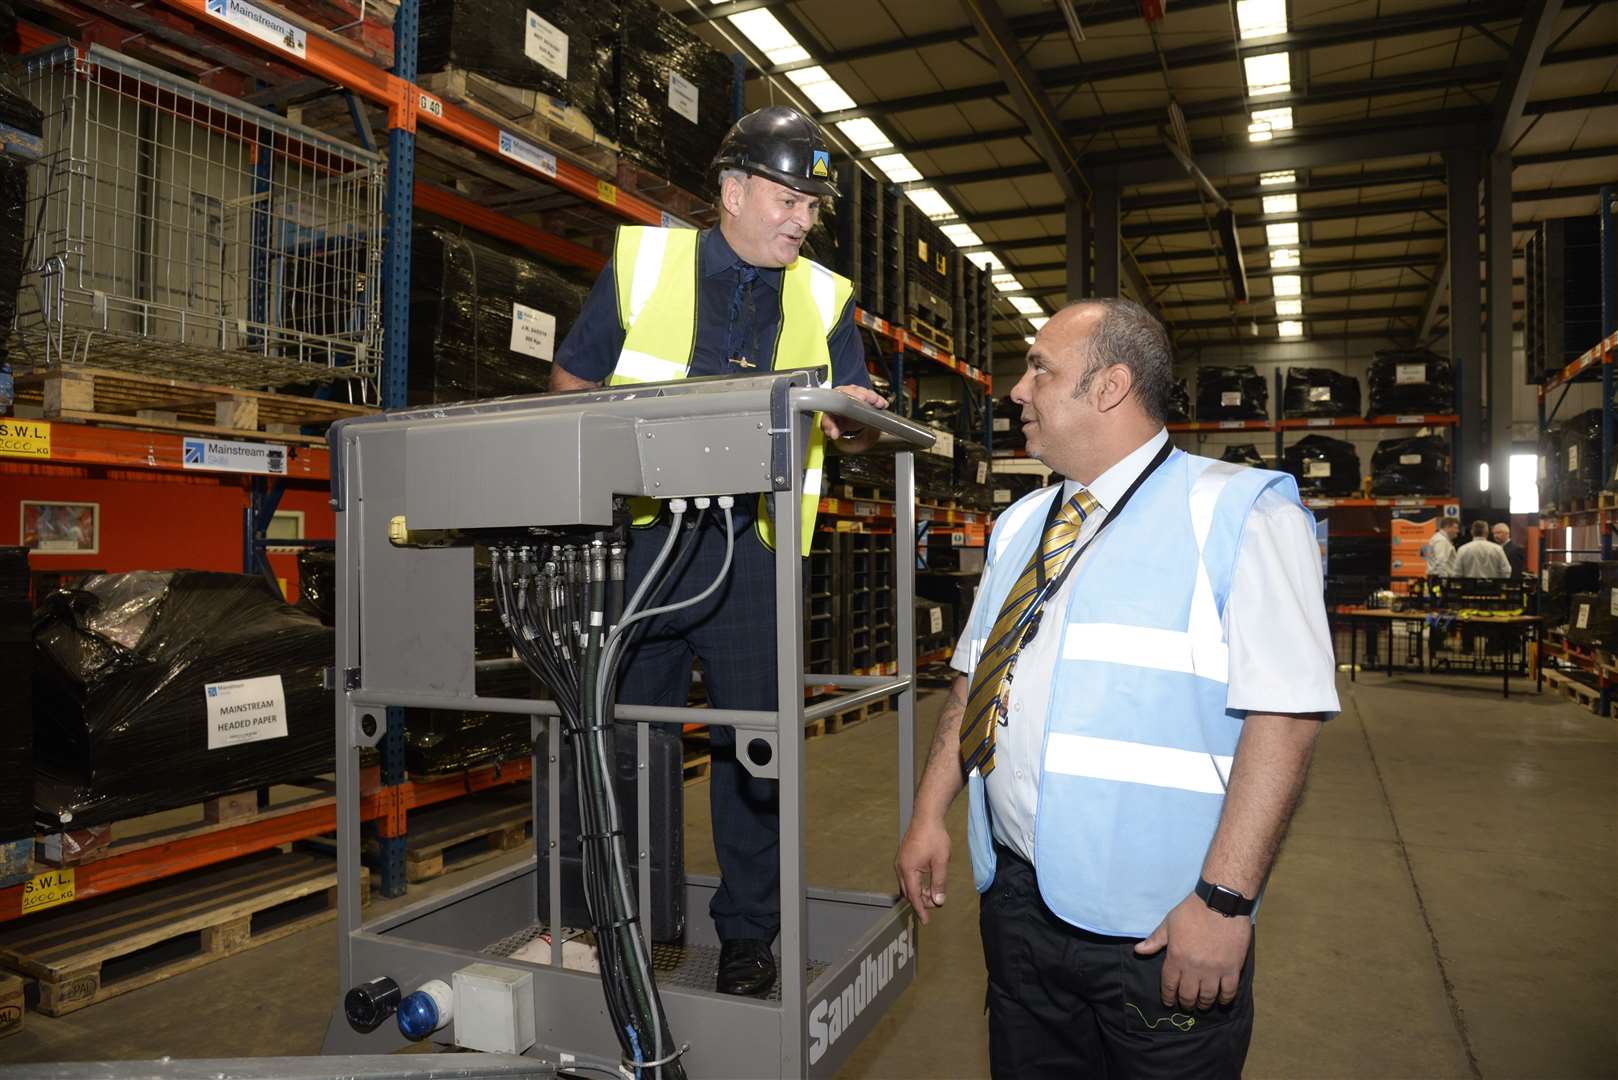 Joe Rook, community engagement manager at Standford Hill Prison is instructed on a 'cherry picker' by Kevin Dardis during an open day at Mainstream House, Eurolink Estate, Sittingbourne. Picture: Chris Davey